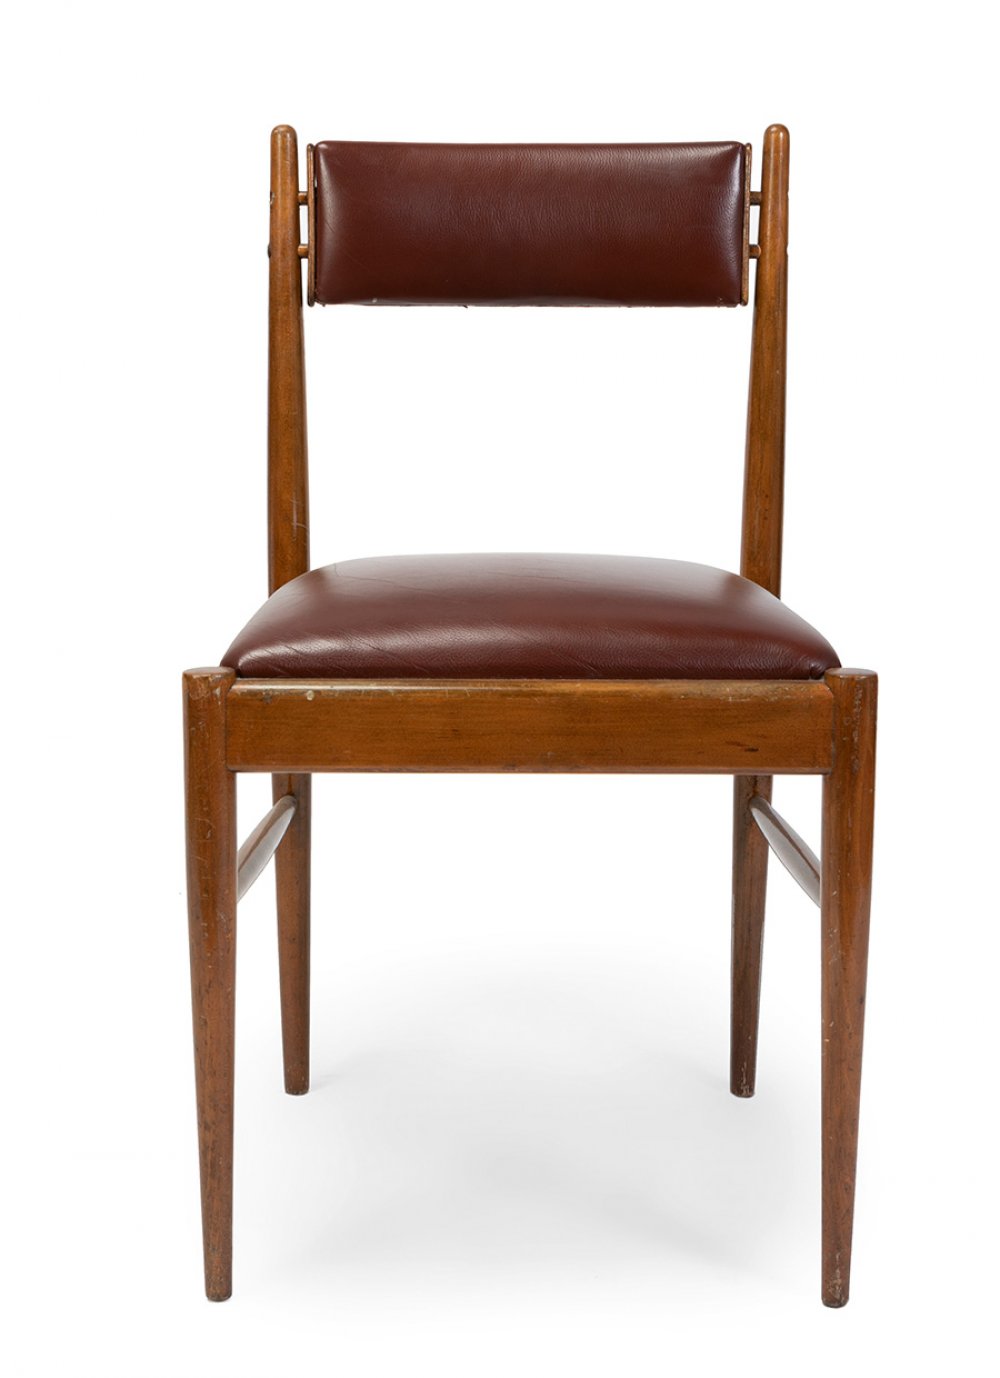 Set of six chairs, 1950s-60s.Beech wood frame and leather upholstery.In need of refinishing. - Image 2 of 5